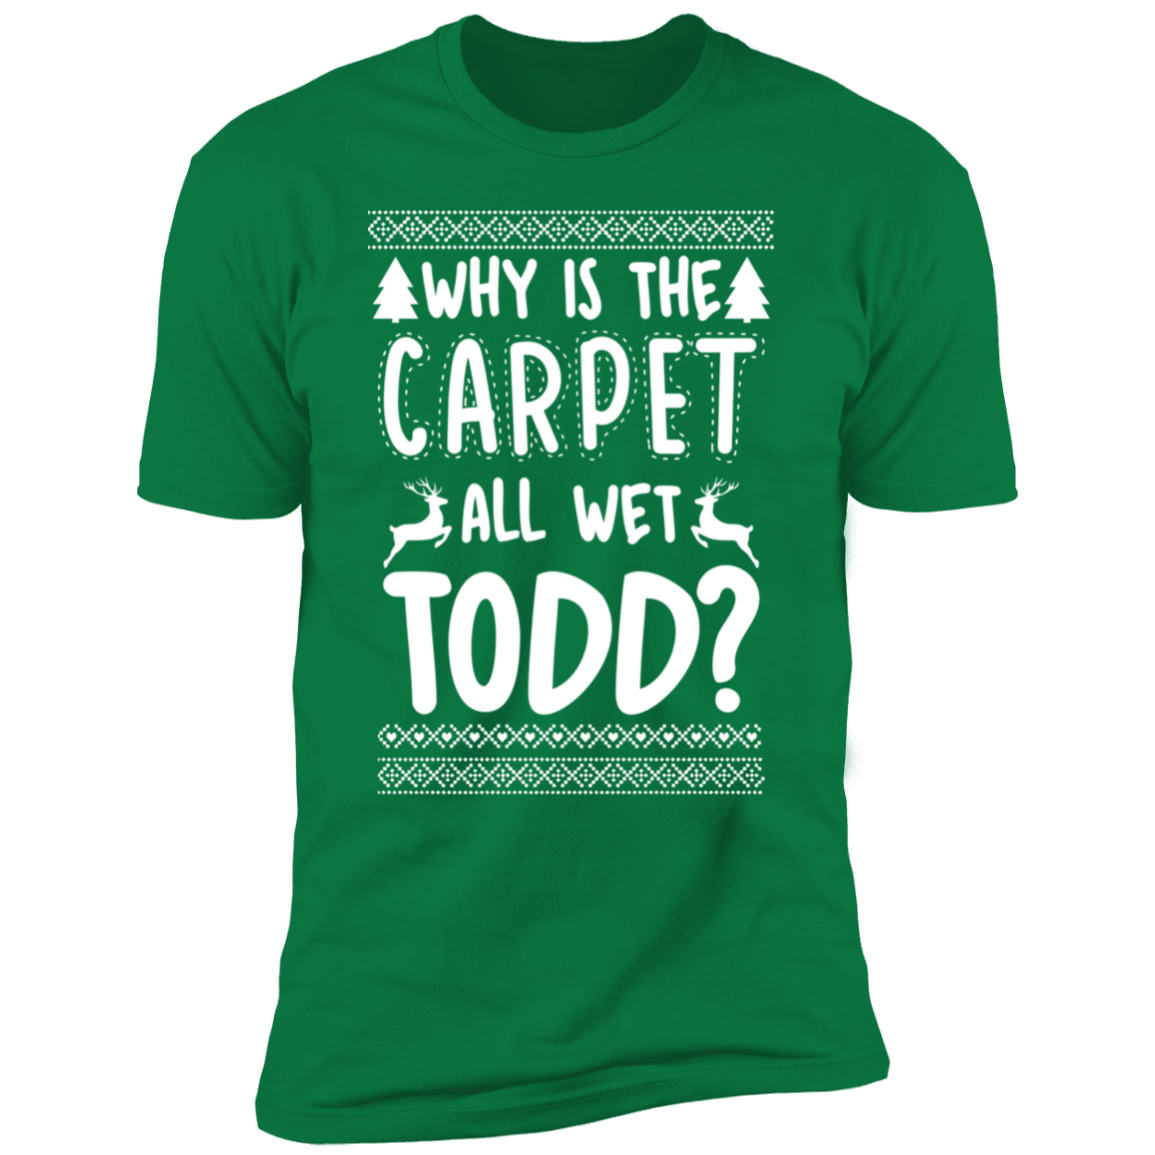 Why is the carpet all wet Todd?